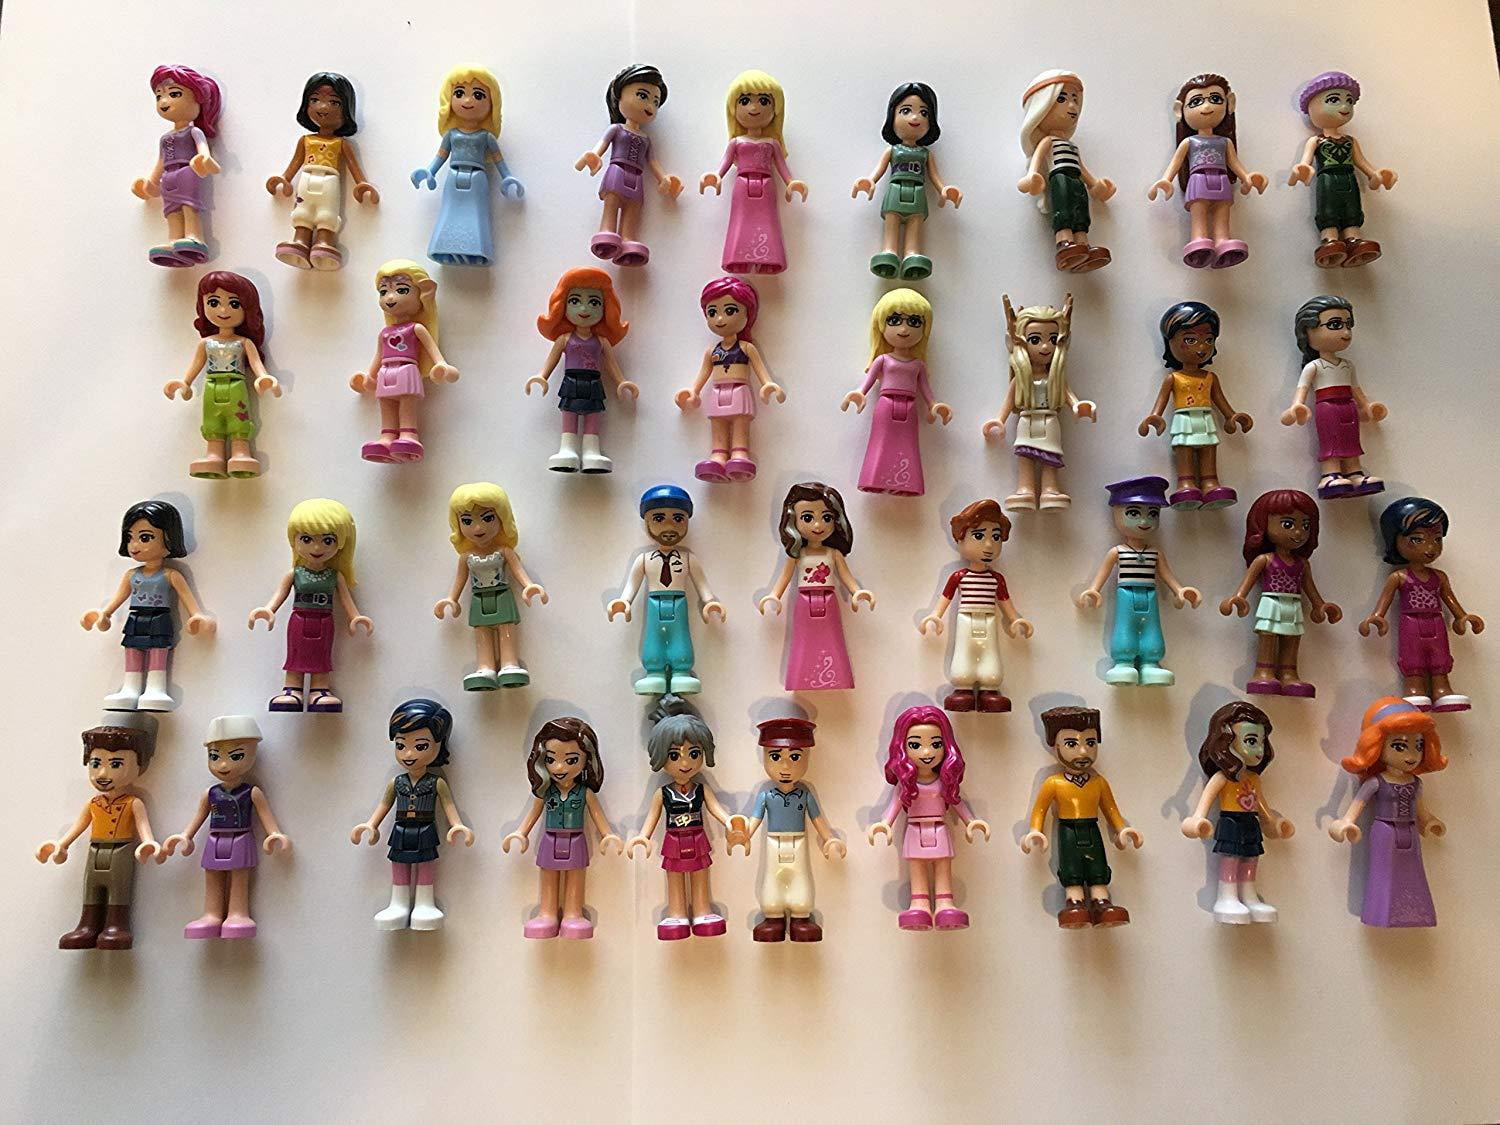 LEGO NEW FRIENDS MINIFIGURES GIRL AND BOYS WOMEN FEMALE FIGURES YOU PICK